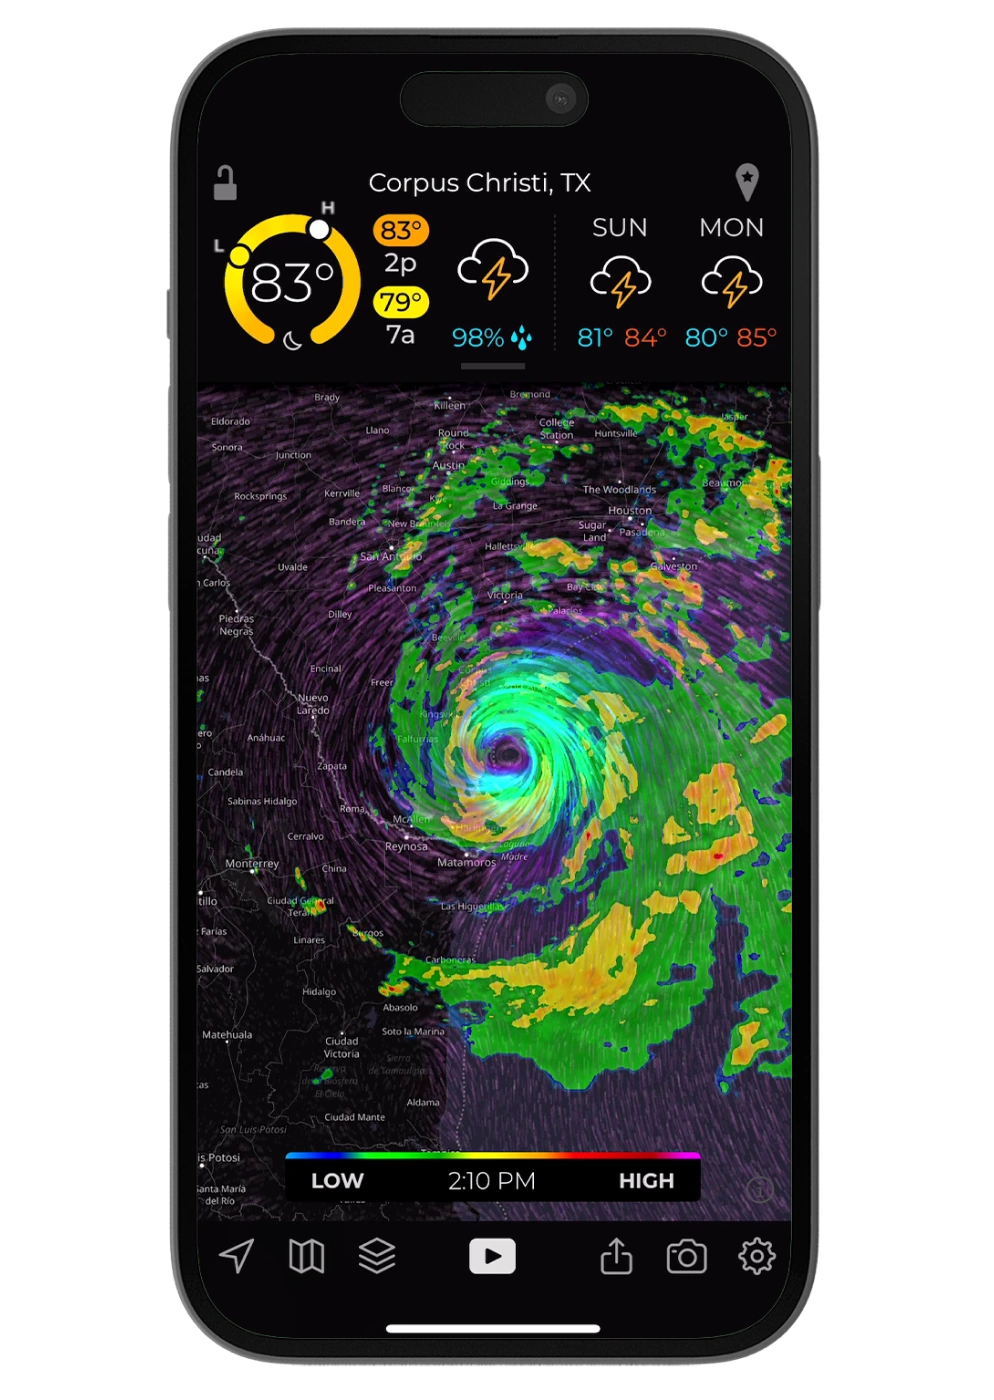 Screenshot of the MyRadar app showing temperatures and weather imagery